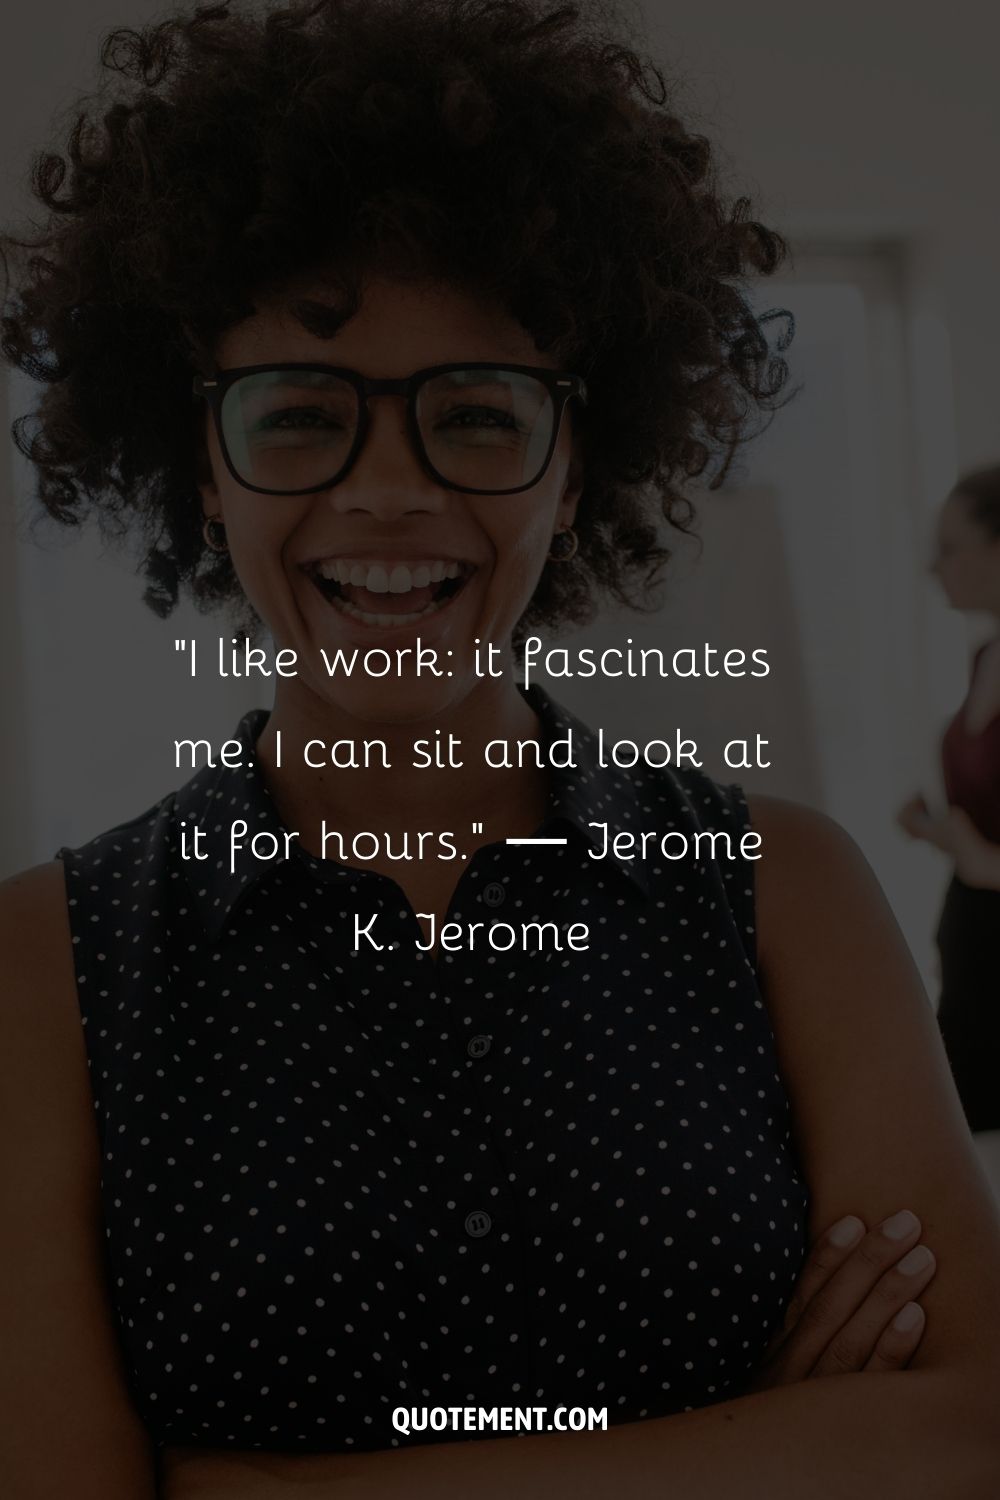 “I like work it fascinates me. I can sit and look at it for hours.” ― Jerome K. Jerome